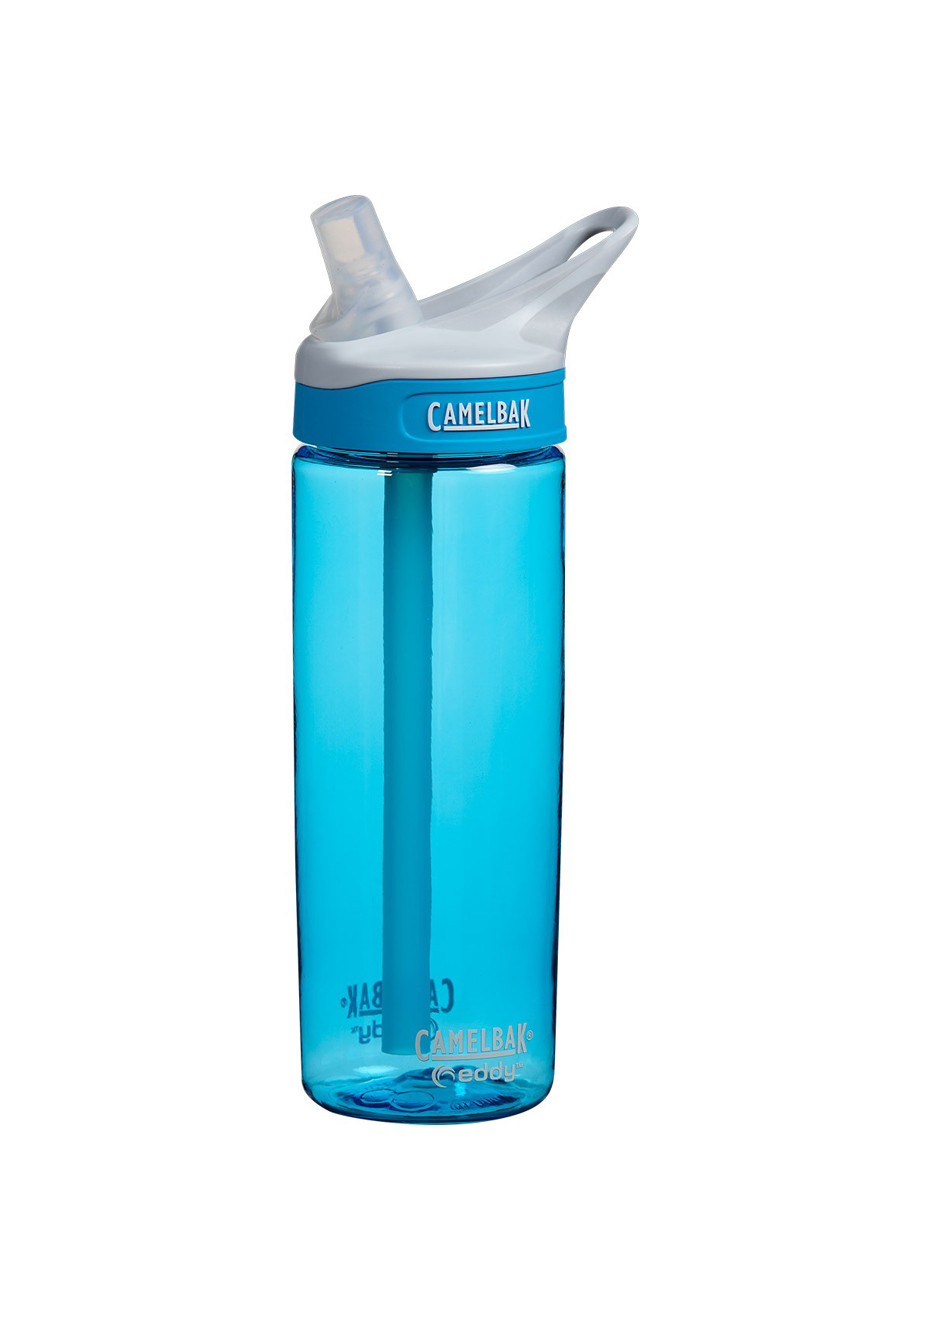 Details about    Hands Free Water Bottle Holder  White